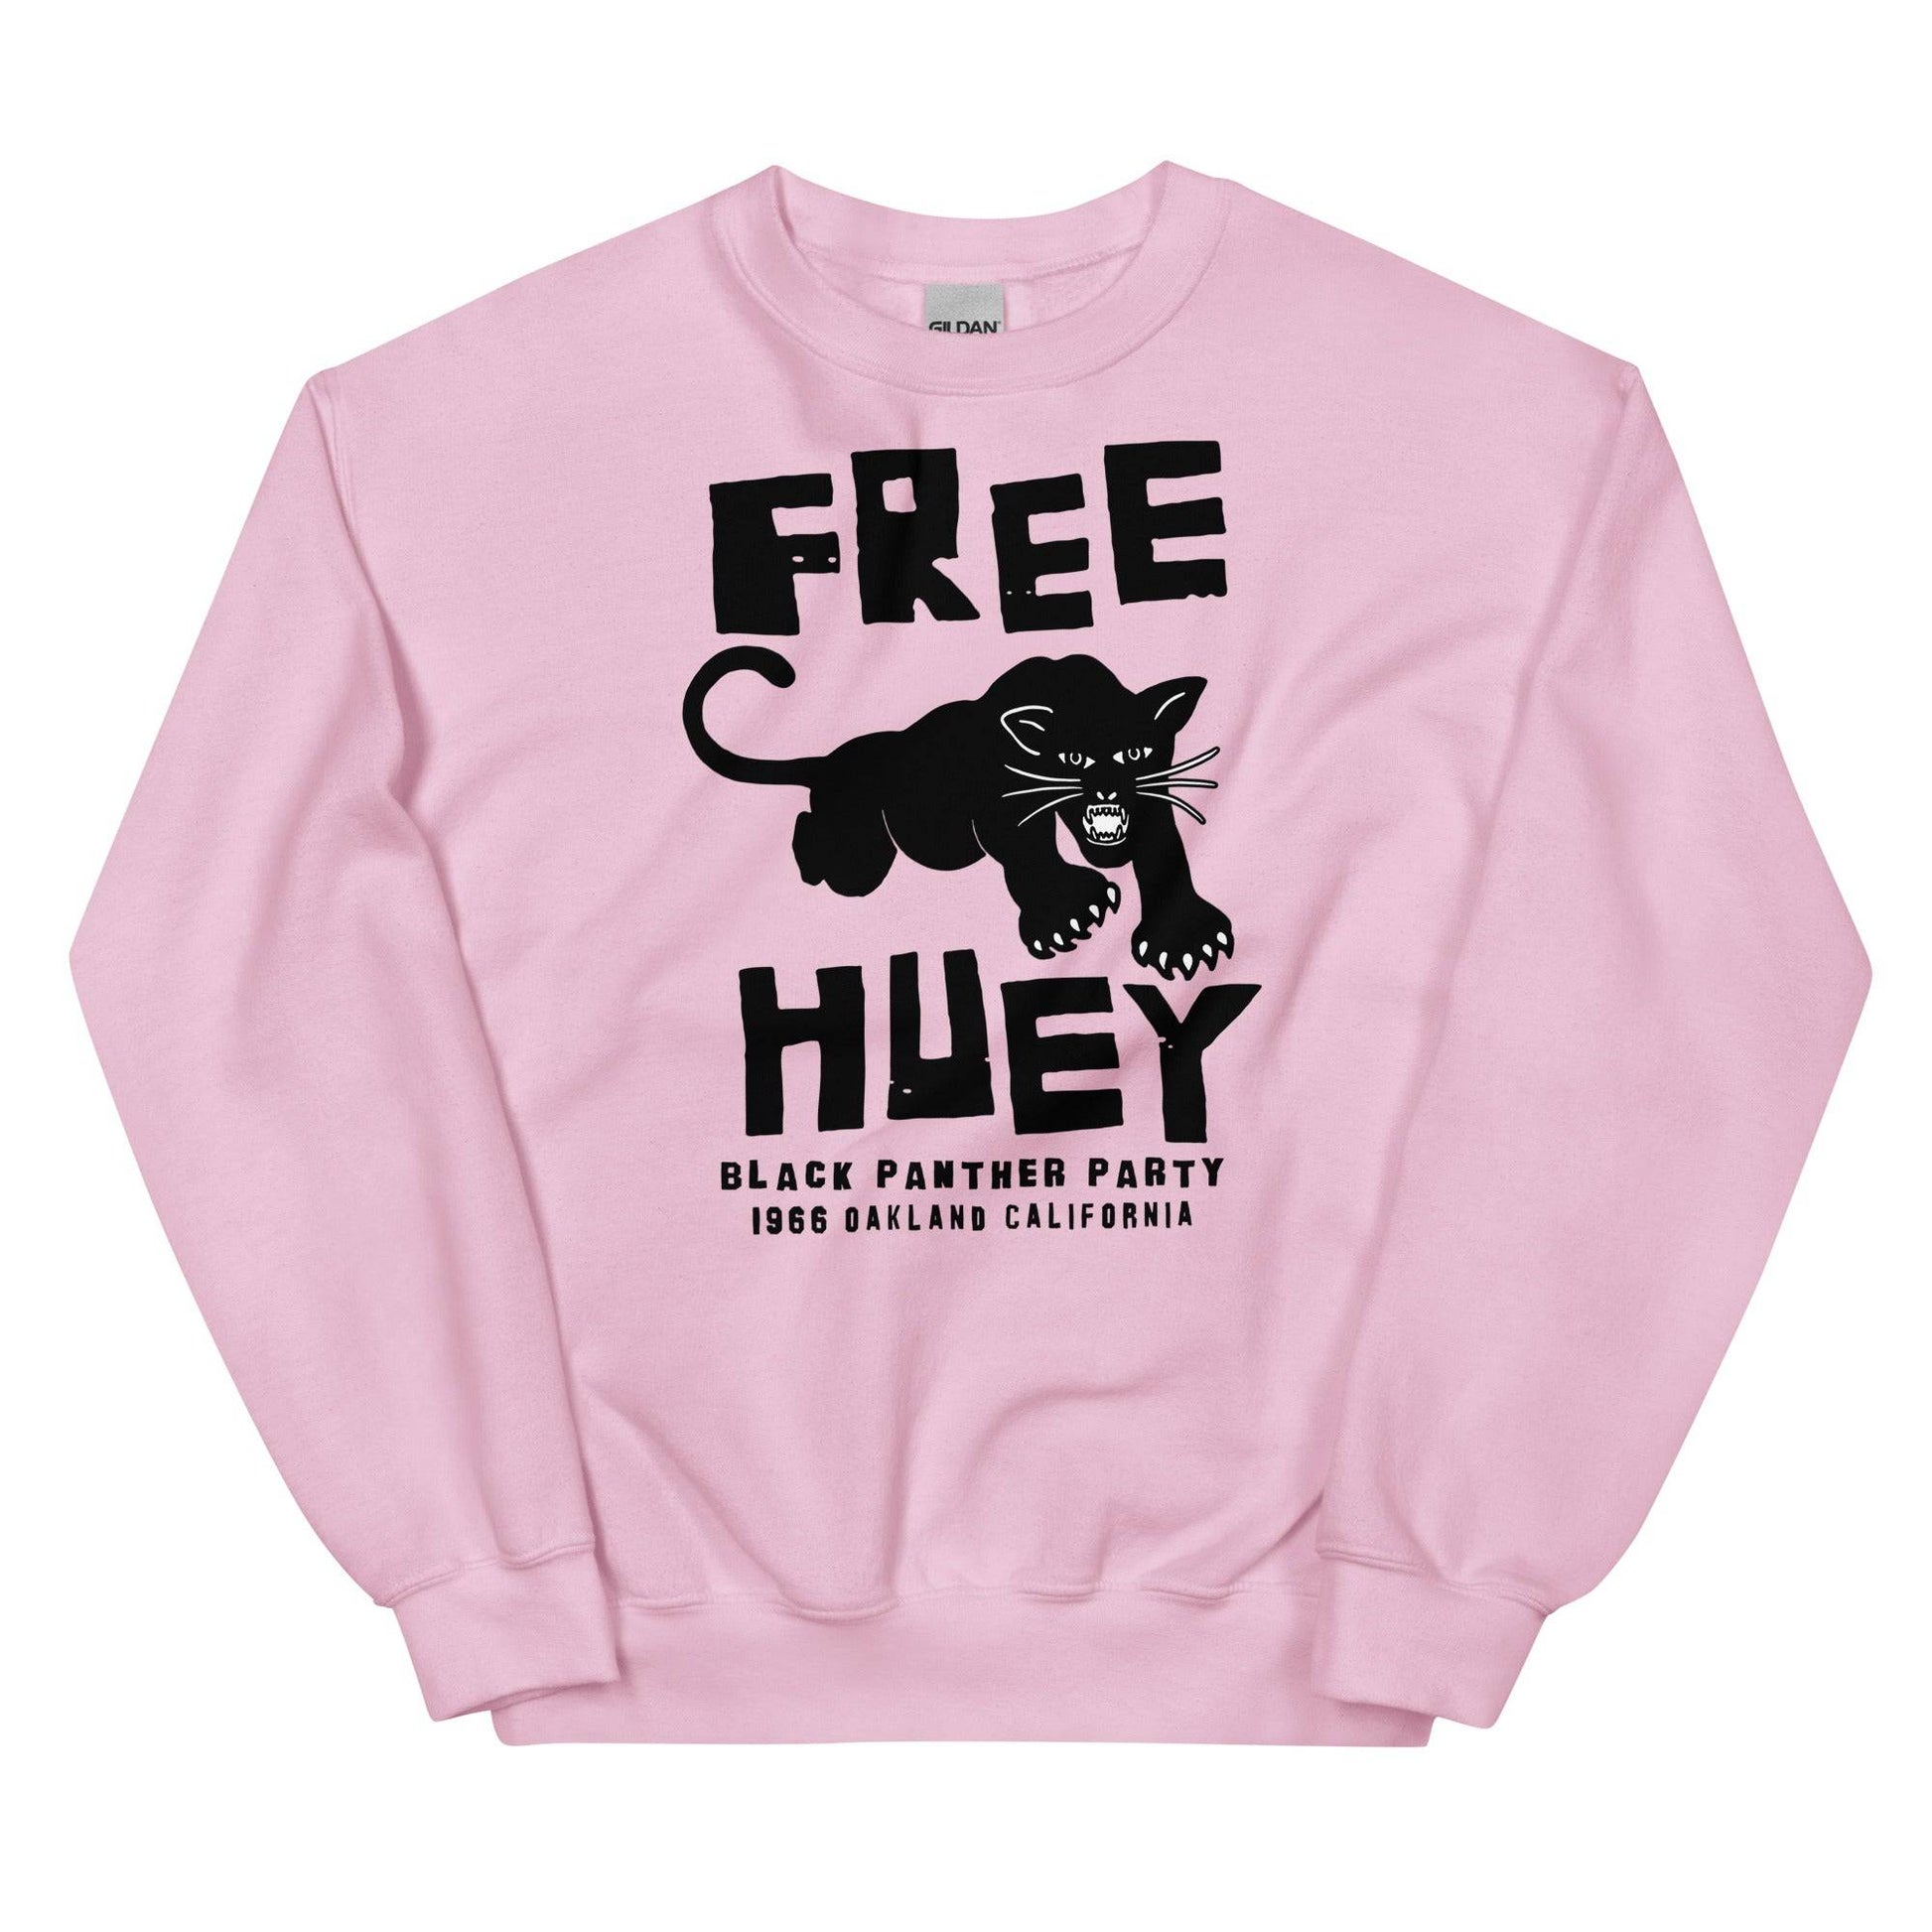 a pink sweatshirt with a black panther on it